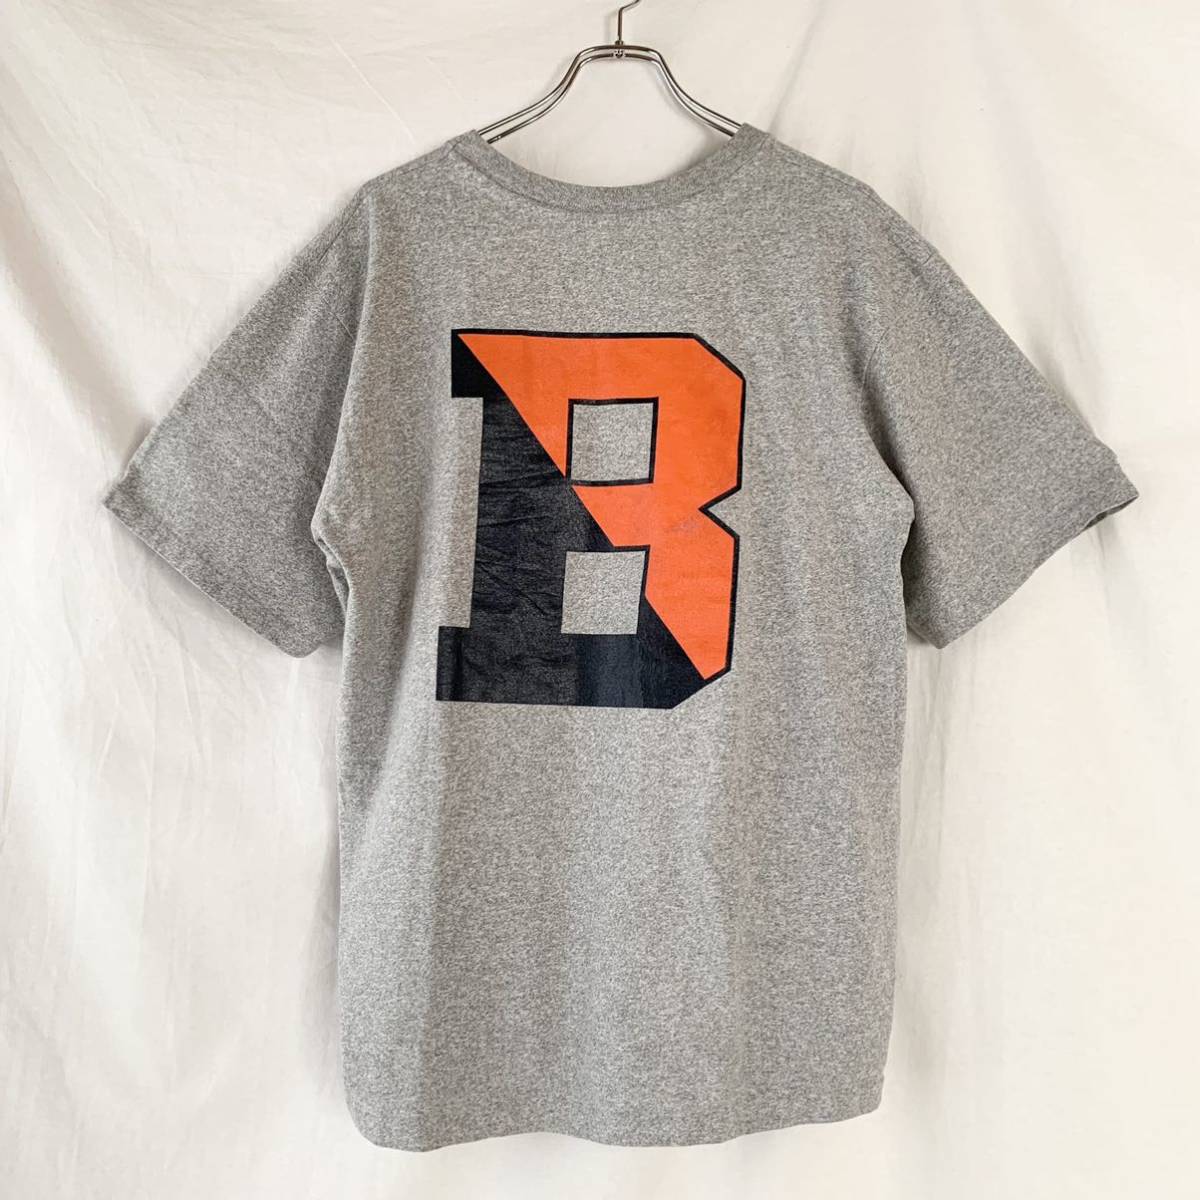 90s USA製 The Cotton Exchange BUCKNELL BISON バックネル大学 両面プリント デカロゴ カレッジ Tシャツ L ヴィンテージ 杢グレーの画像1